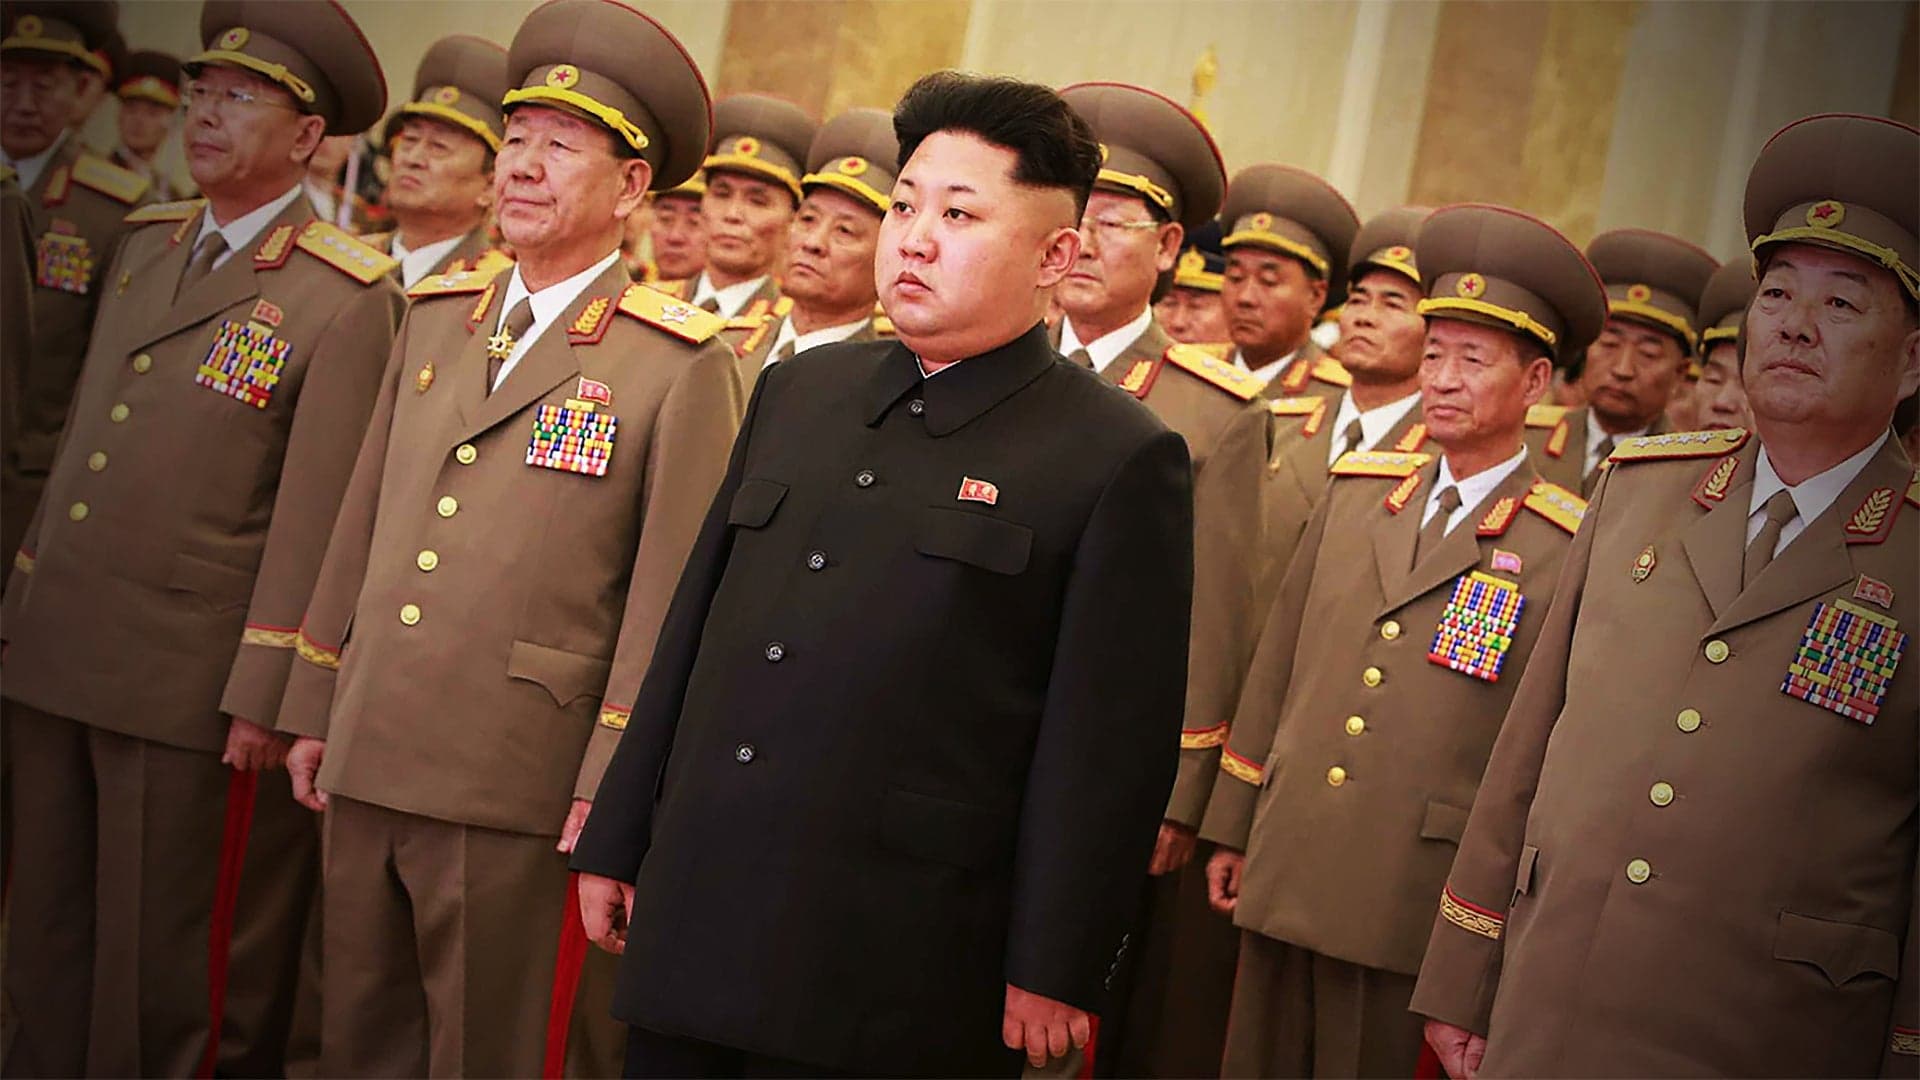 Kim’s Ousting Of Top Military Officials Ahead Of Summit May Be A Sign Of Instability At Home